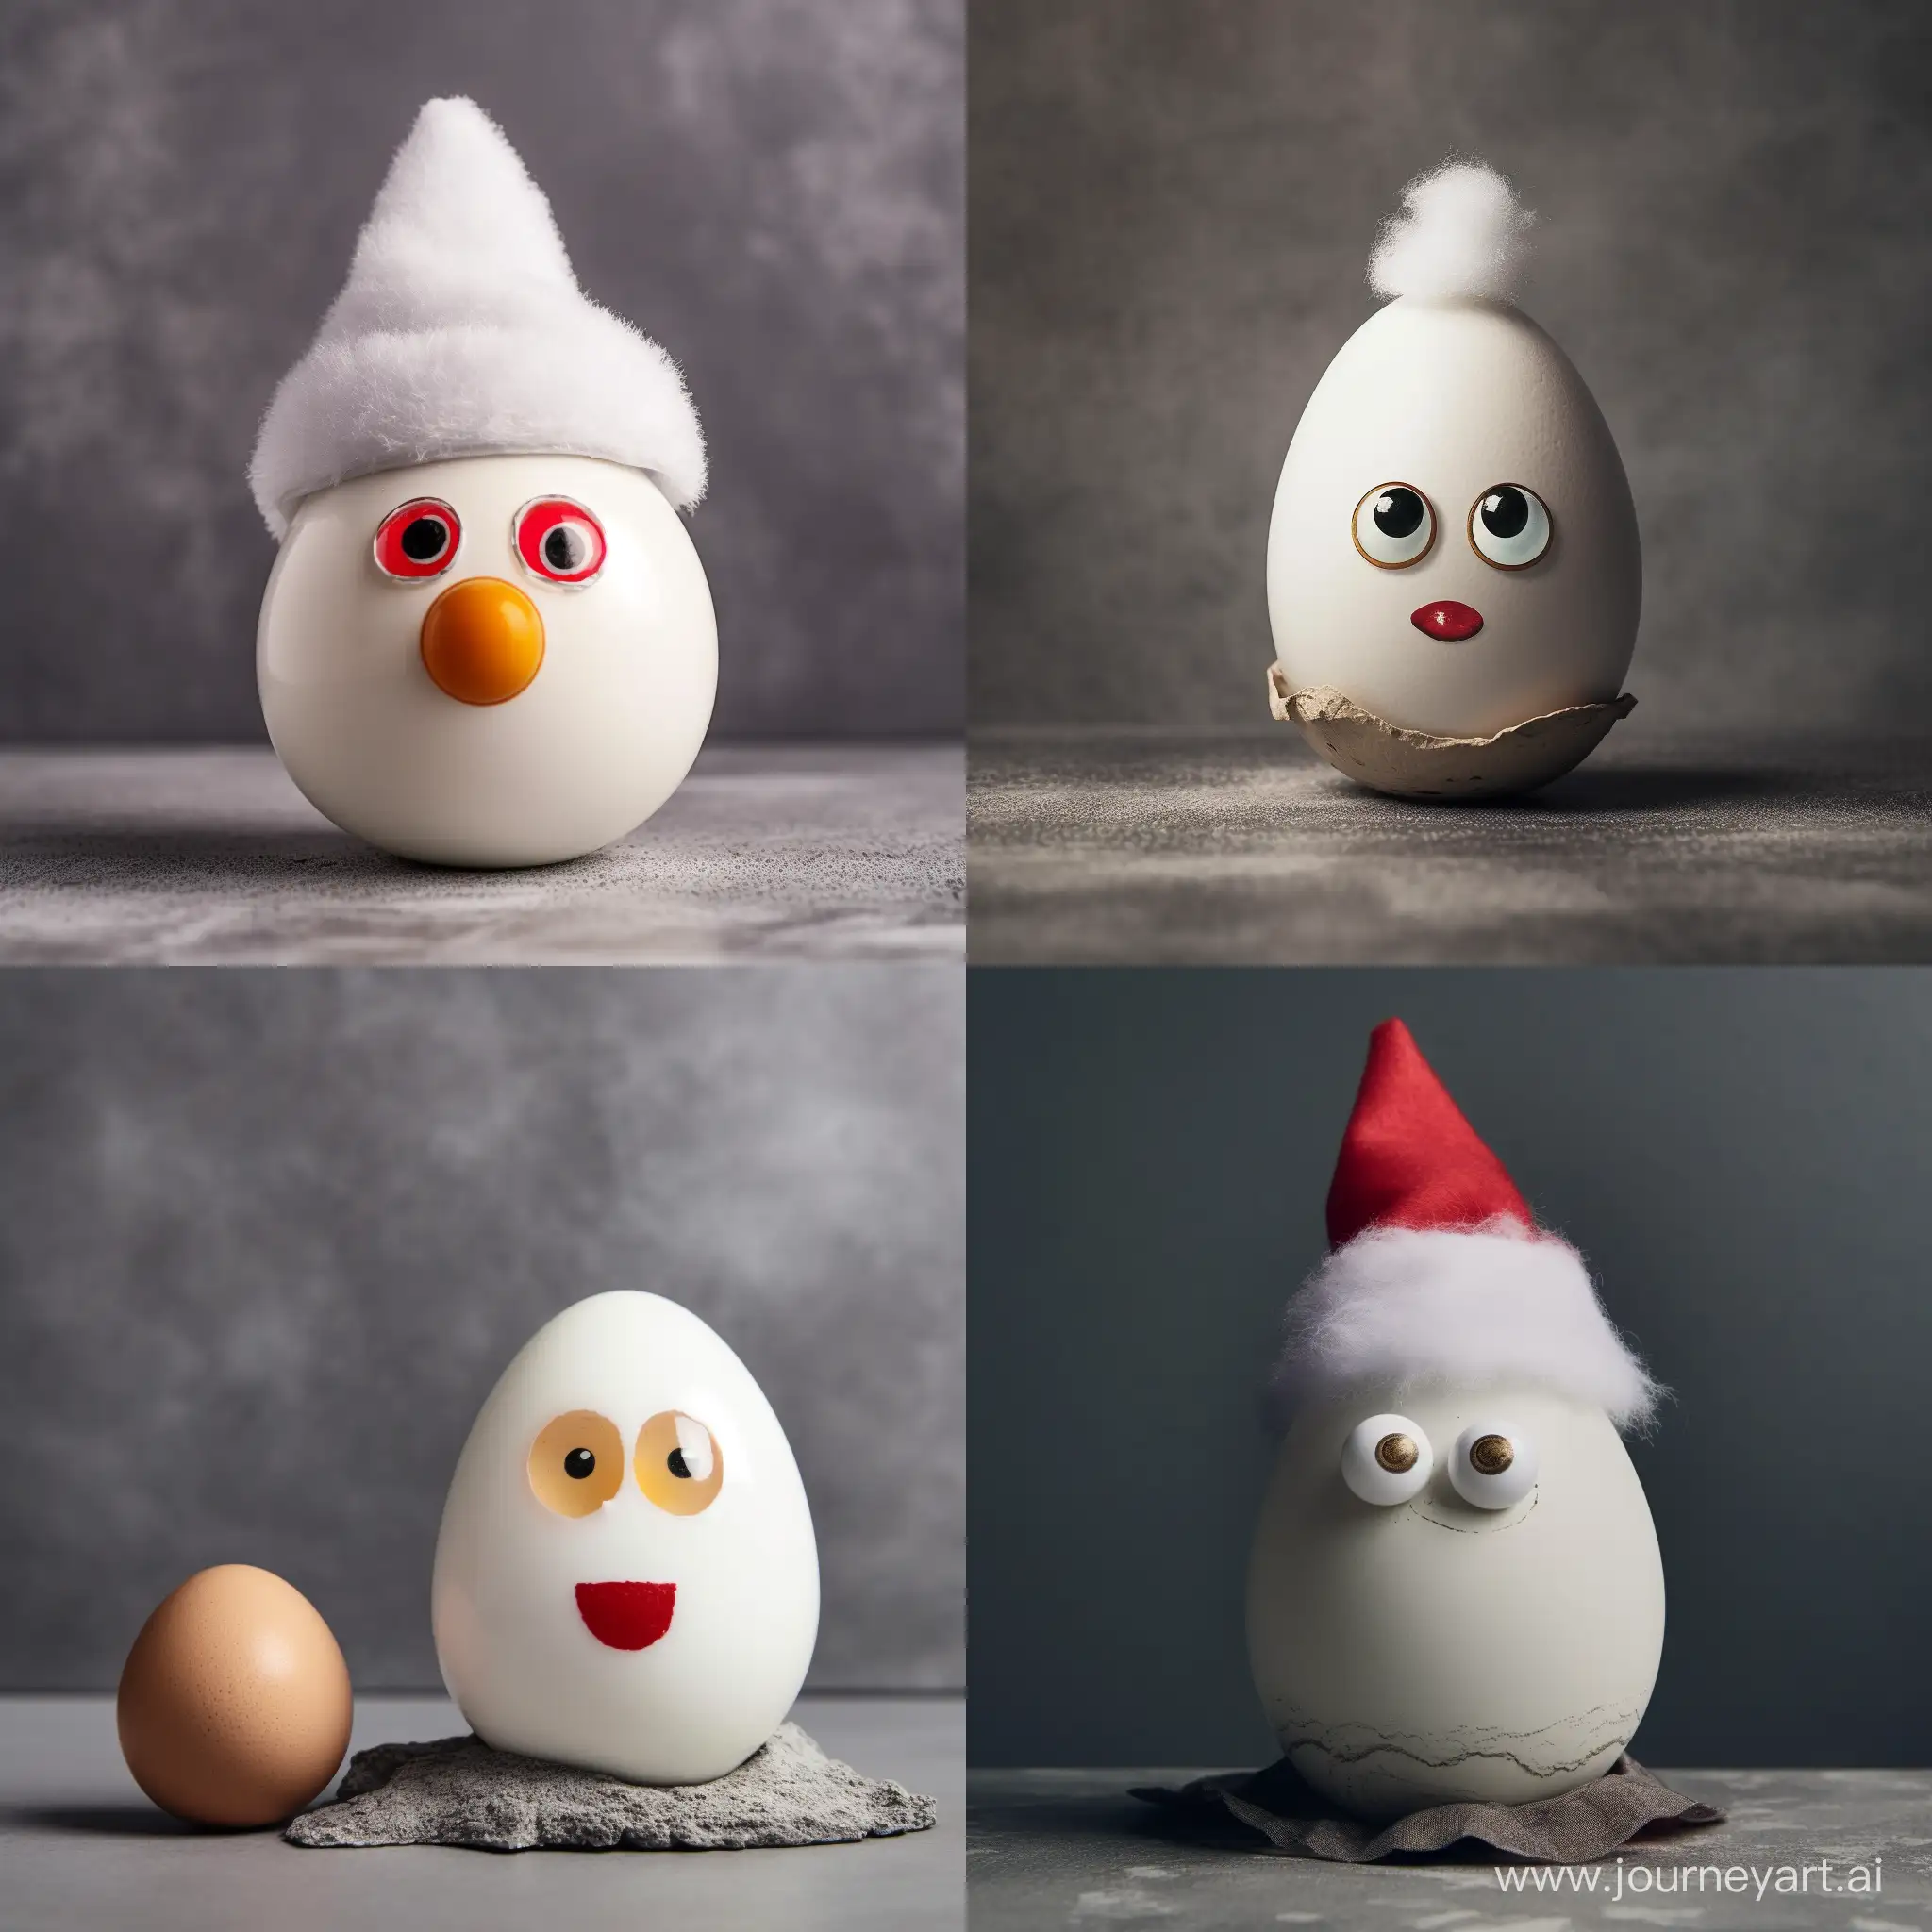 Festive-White-Egg-in-Christmas-Hat-with-Playful-Glance